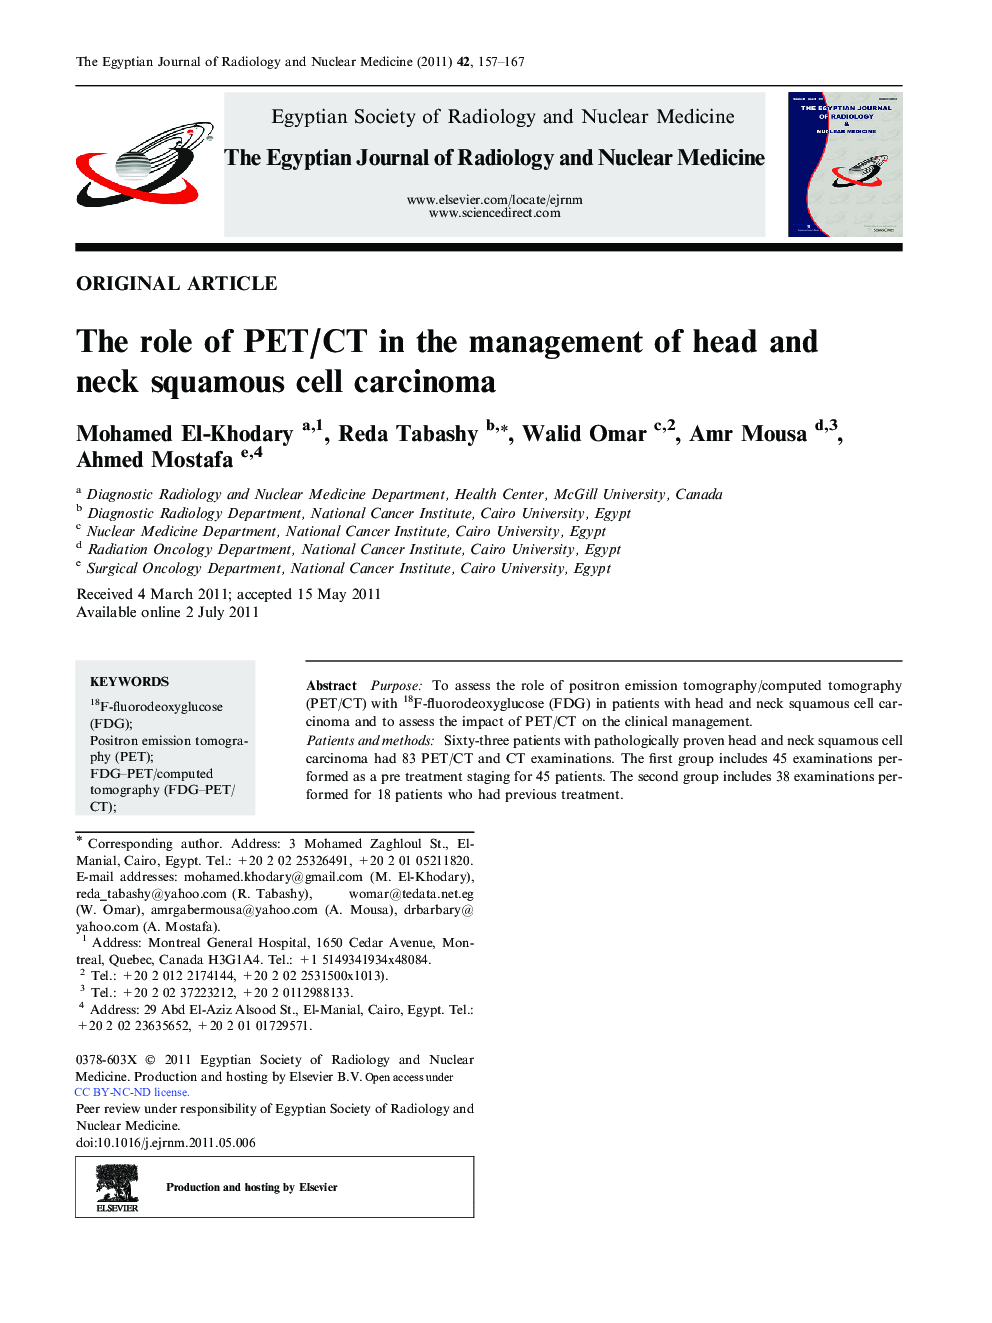 The role of PET/CT in the management of head and neck squamous cell carcinoma 